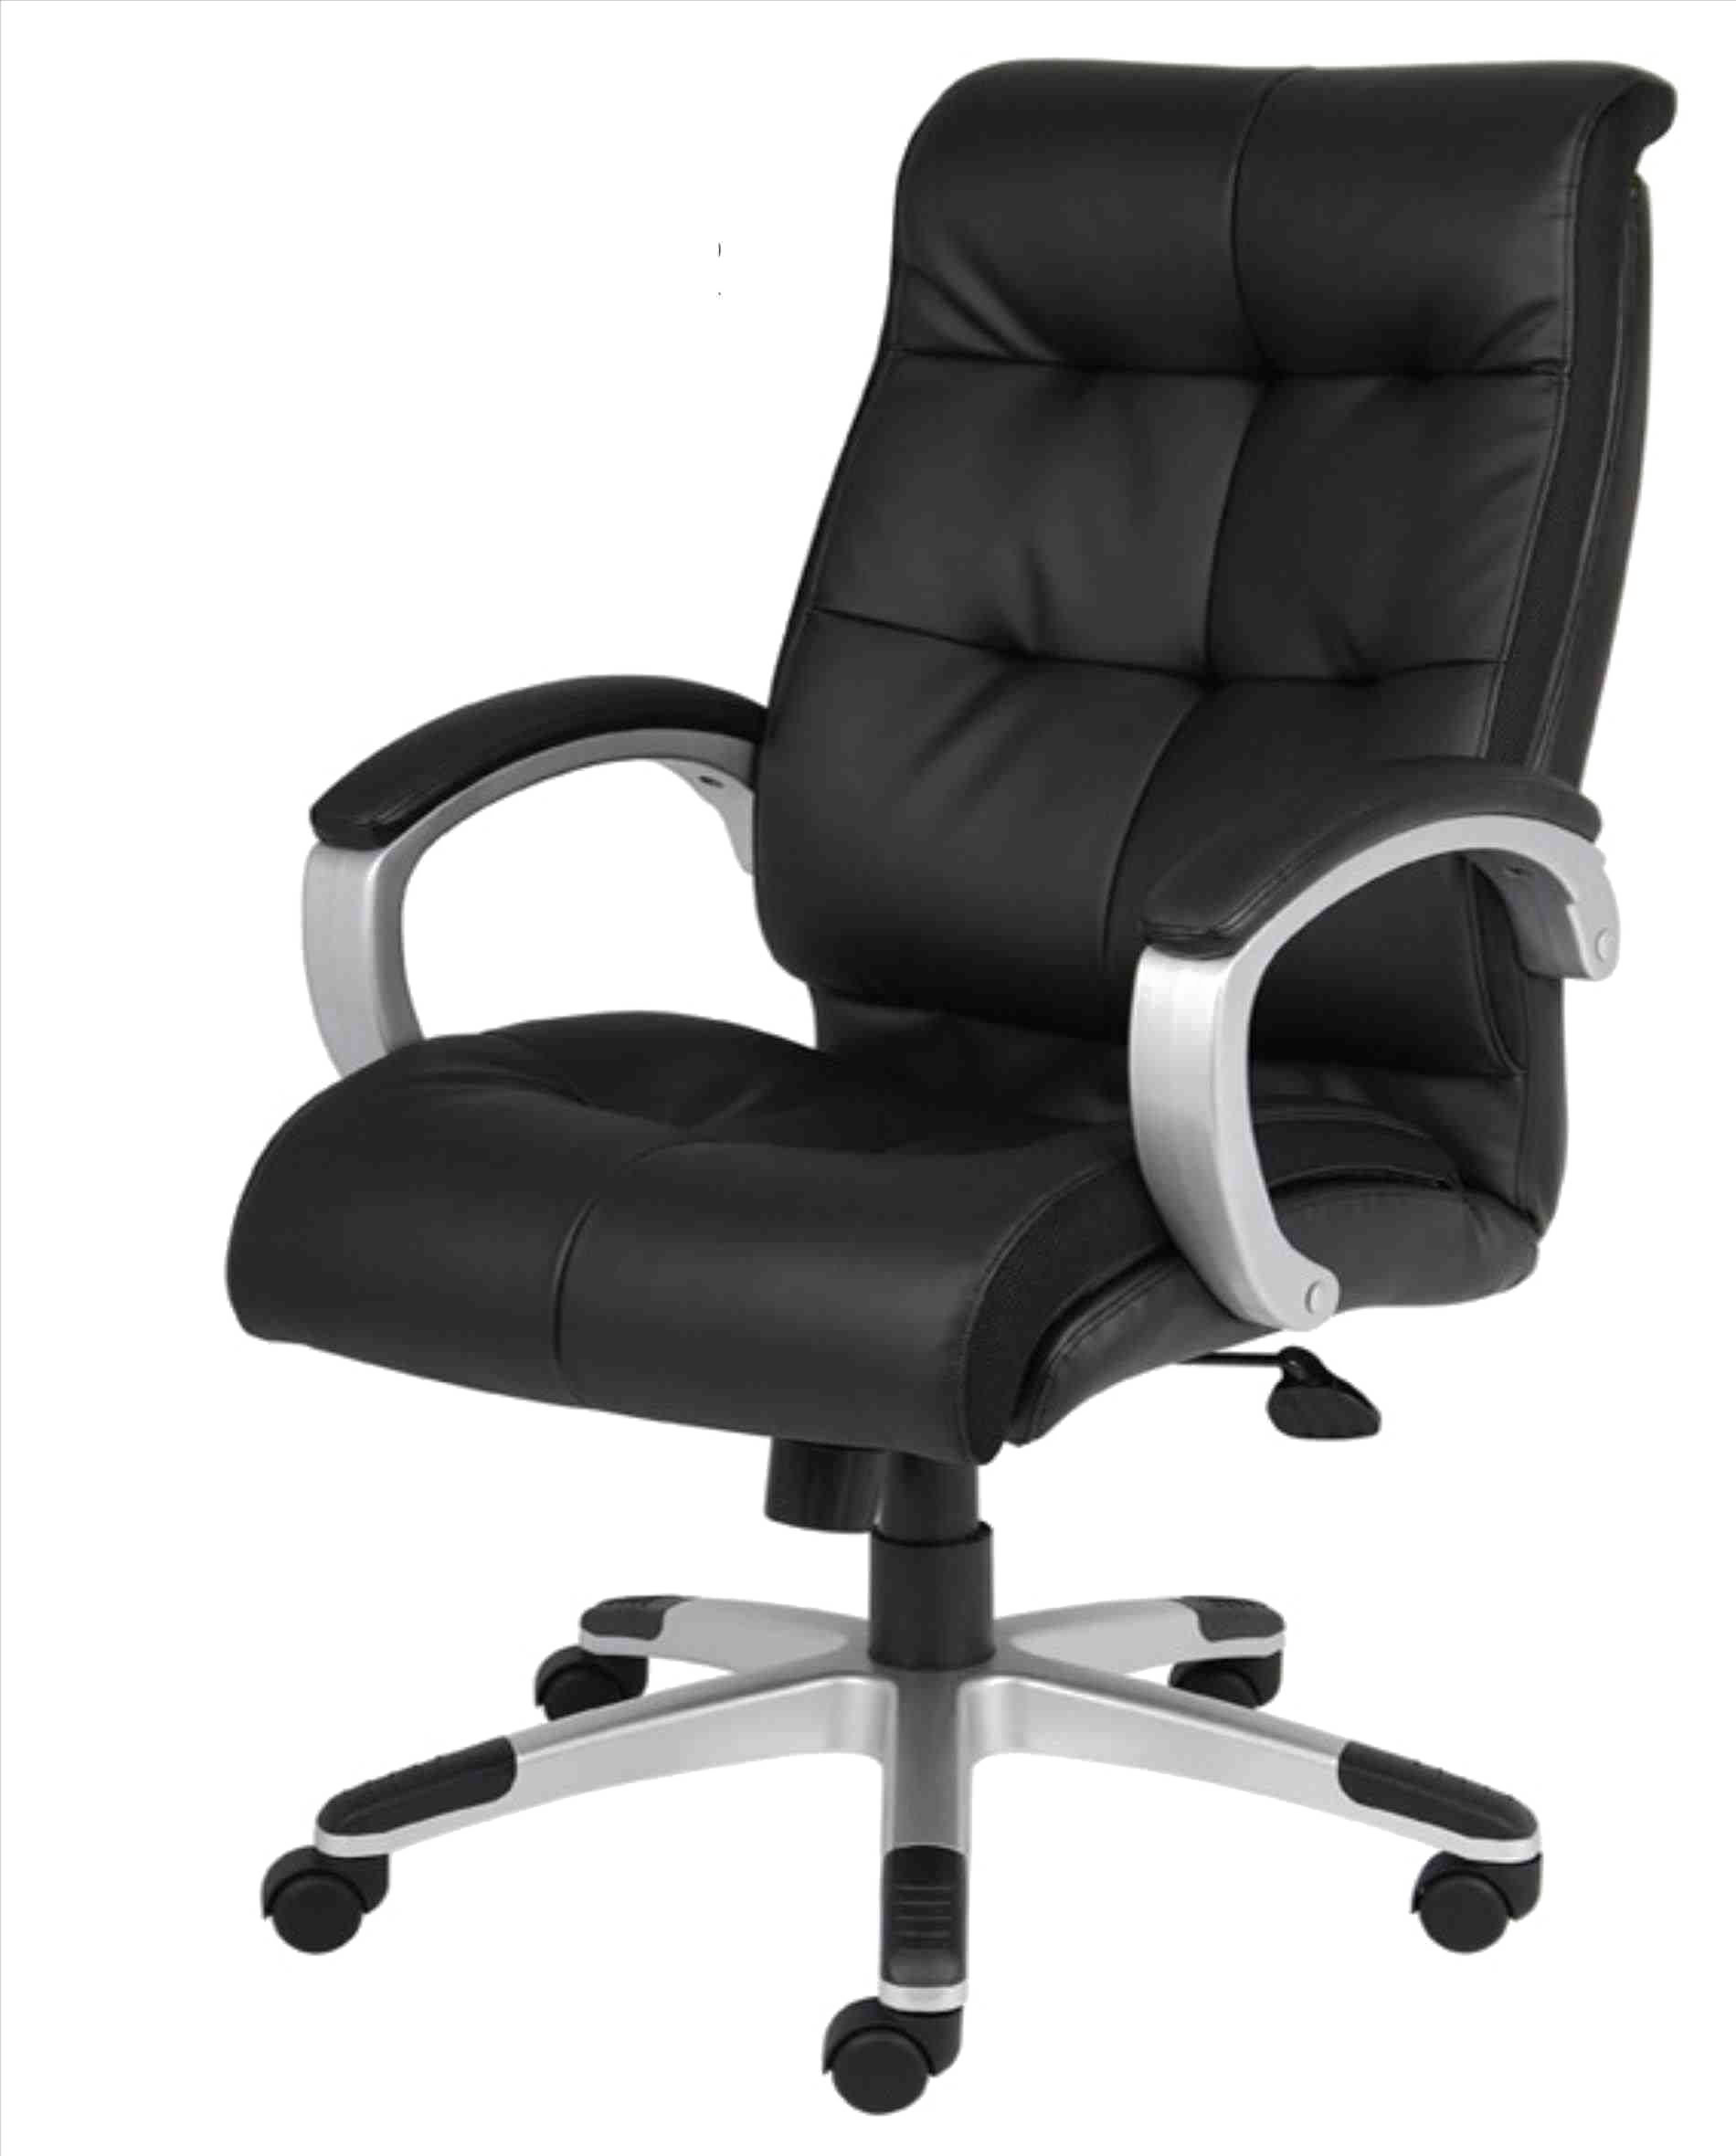 0 Result Images of Chair Top View Png For Photoshop - PNG Image Collection